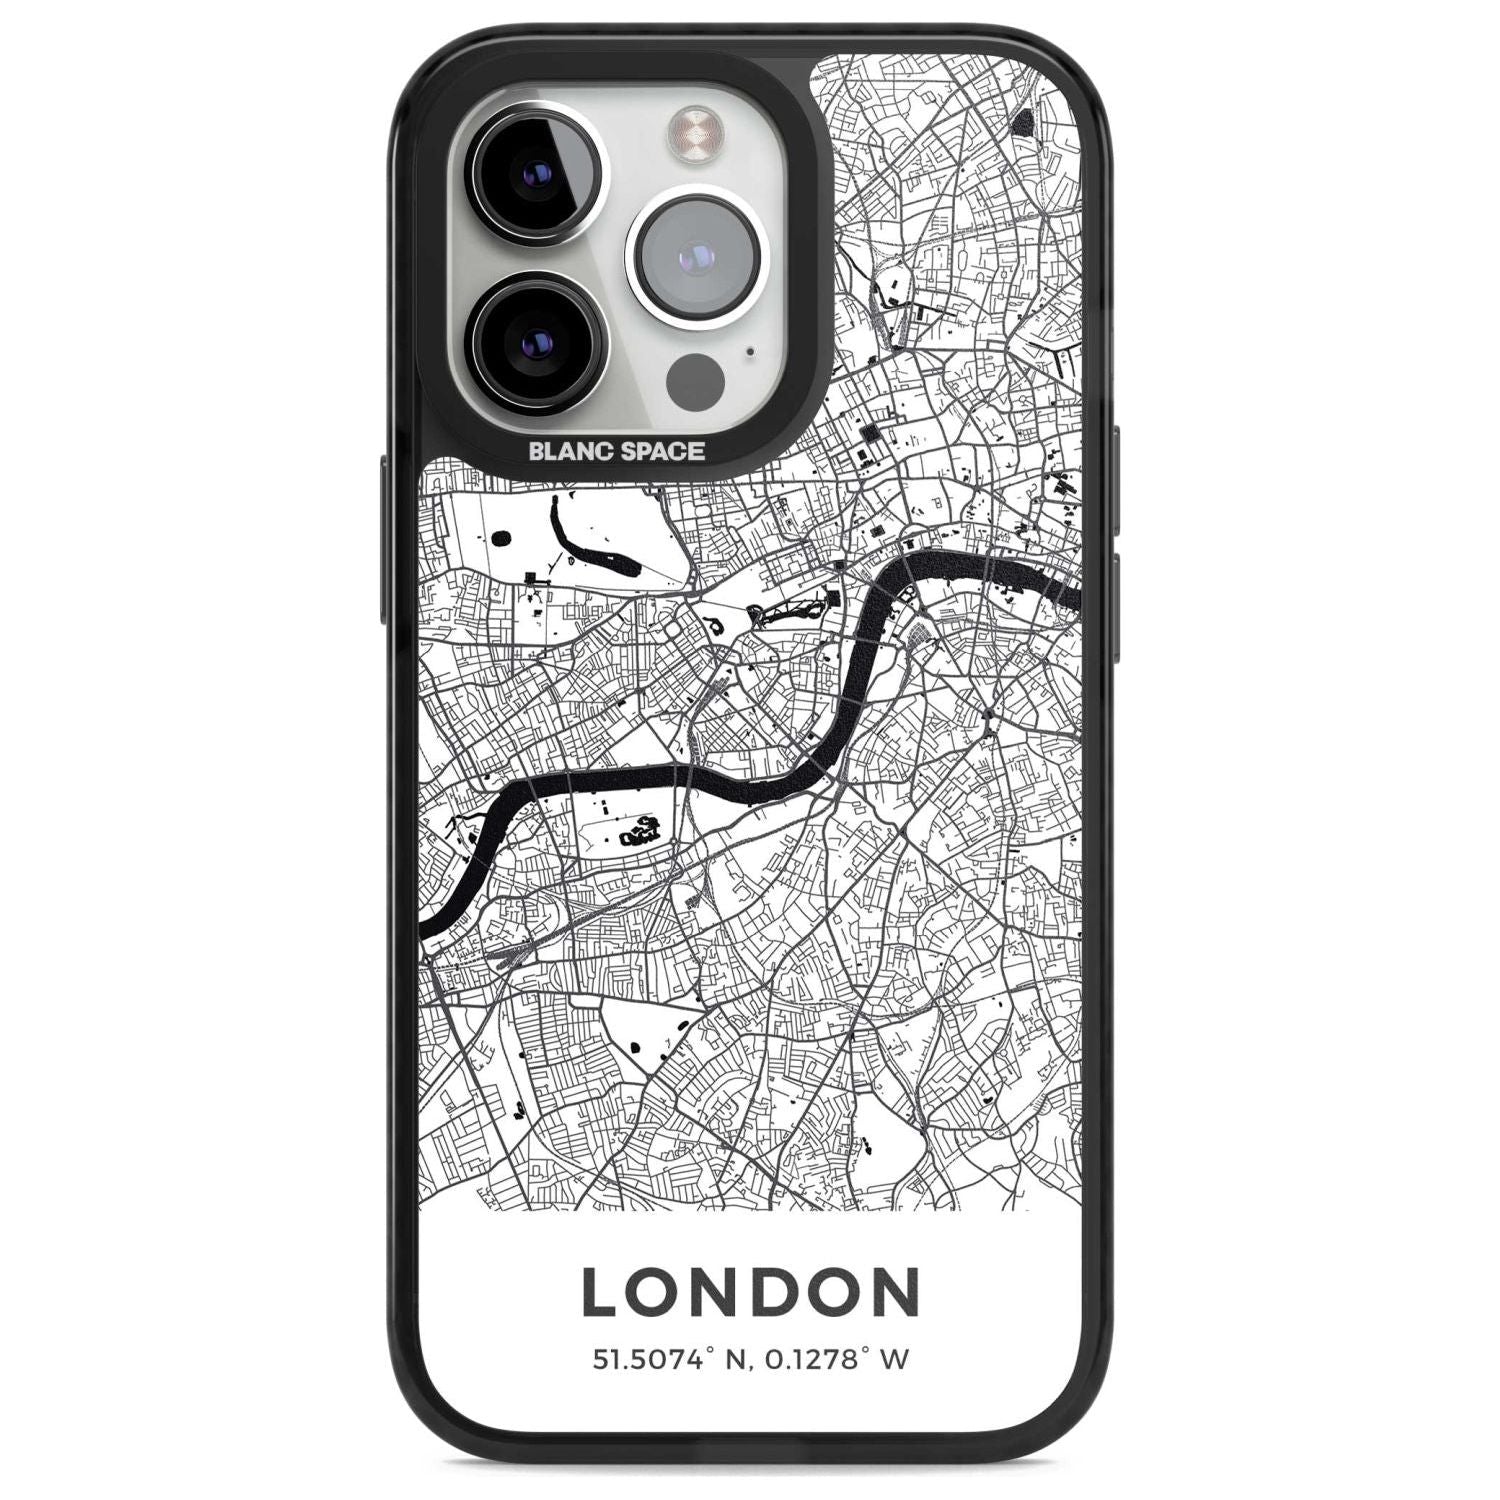 Map of London, England Phone Case iPhone 15 Pro Max / Magsafe Black Impact Case,iPhone 15 Pro / Magsafe Black Impact Case,iPhone 14 Pro Max / Magsafe Black Impact Case,iPhone 14 Pro / Magsafe Black Impact Case,iPhone 13 Pro / Magsafe Black Impact Case Blanc Space